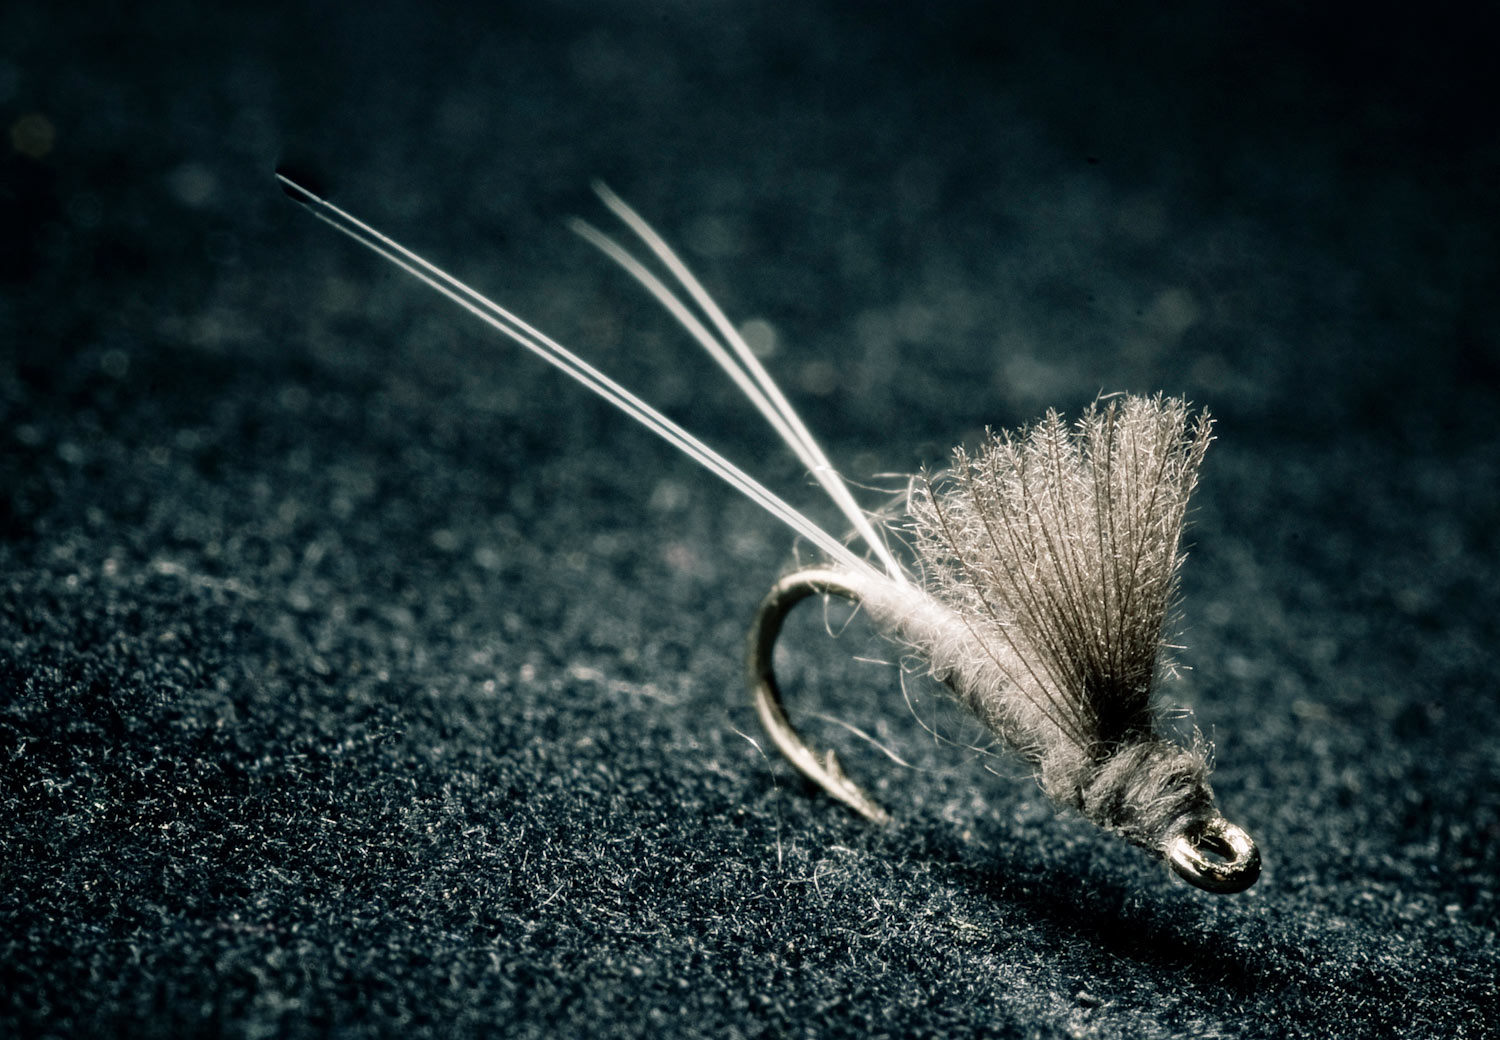 Sunday Classic / RS2 – One of My Favorite Picky Trout Fly Patterns